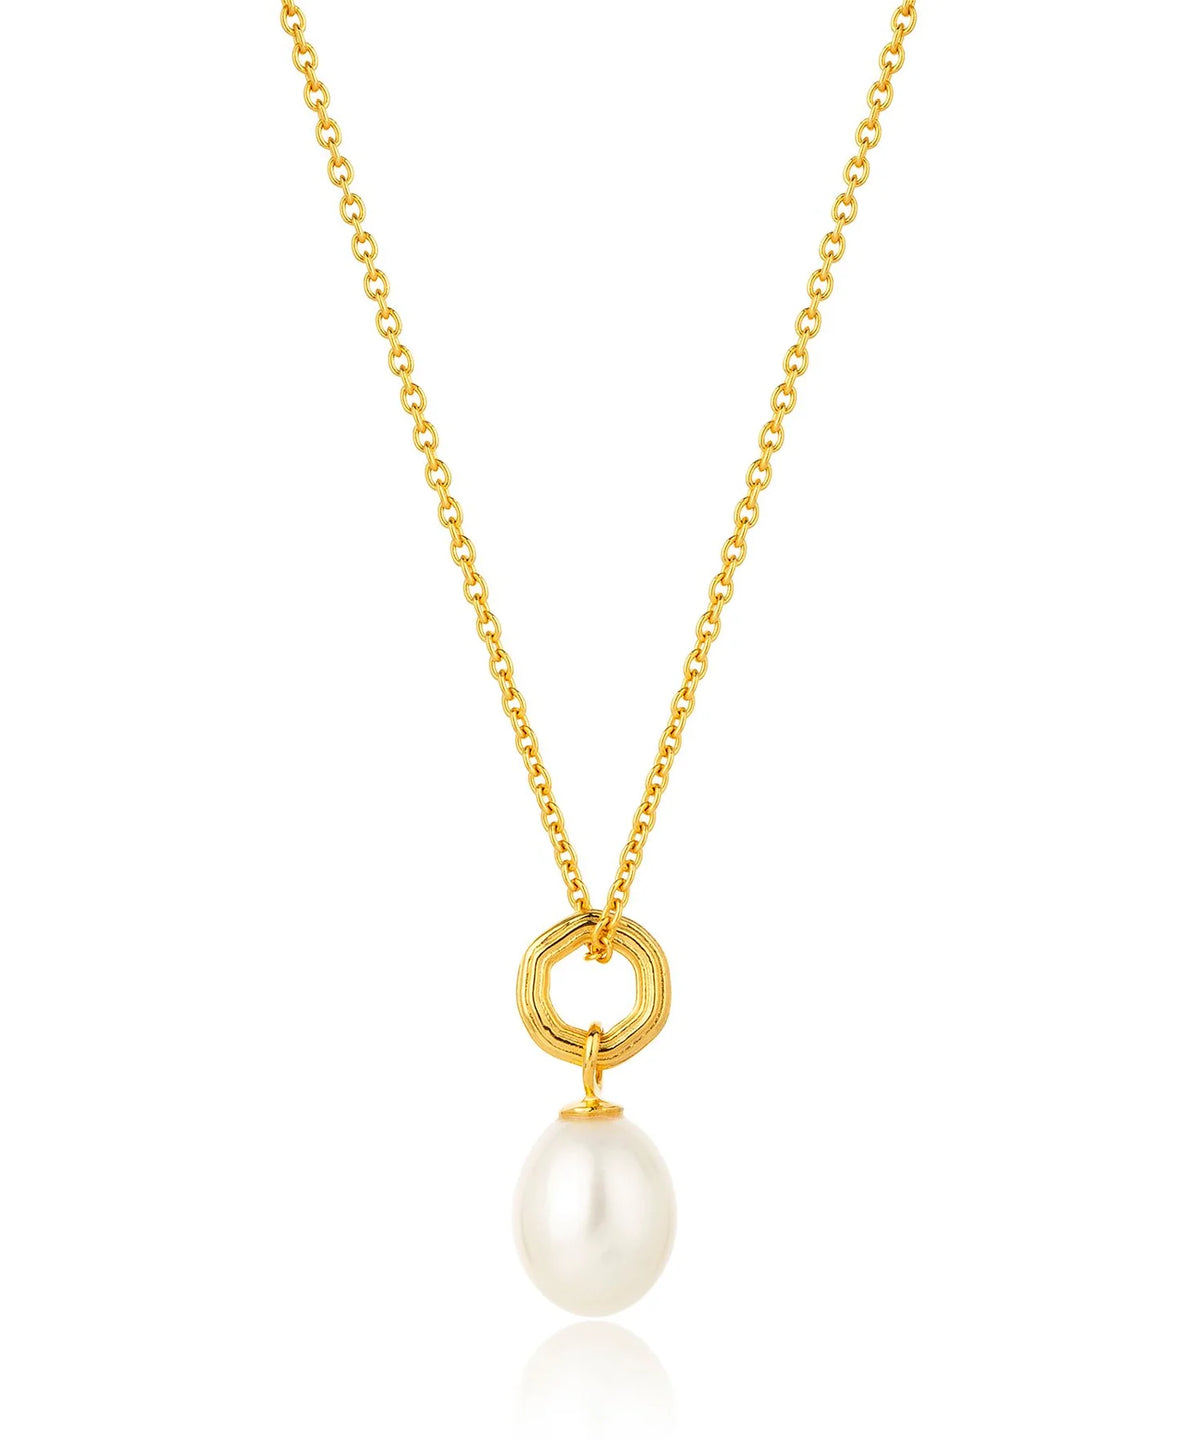 Gold plated chain with single pearl drop pendant